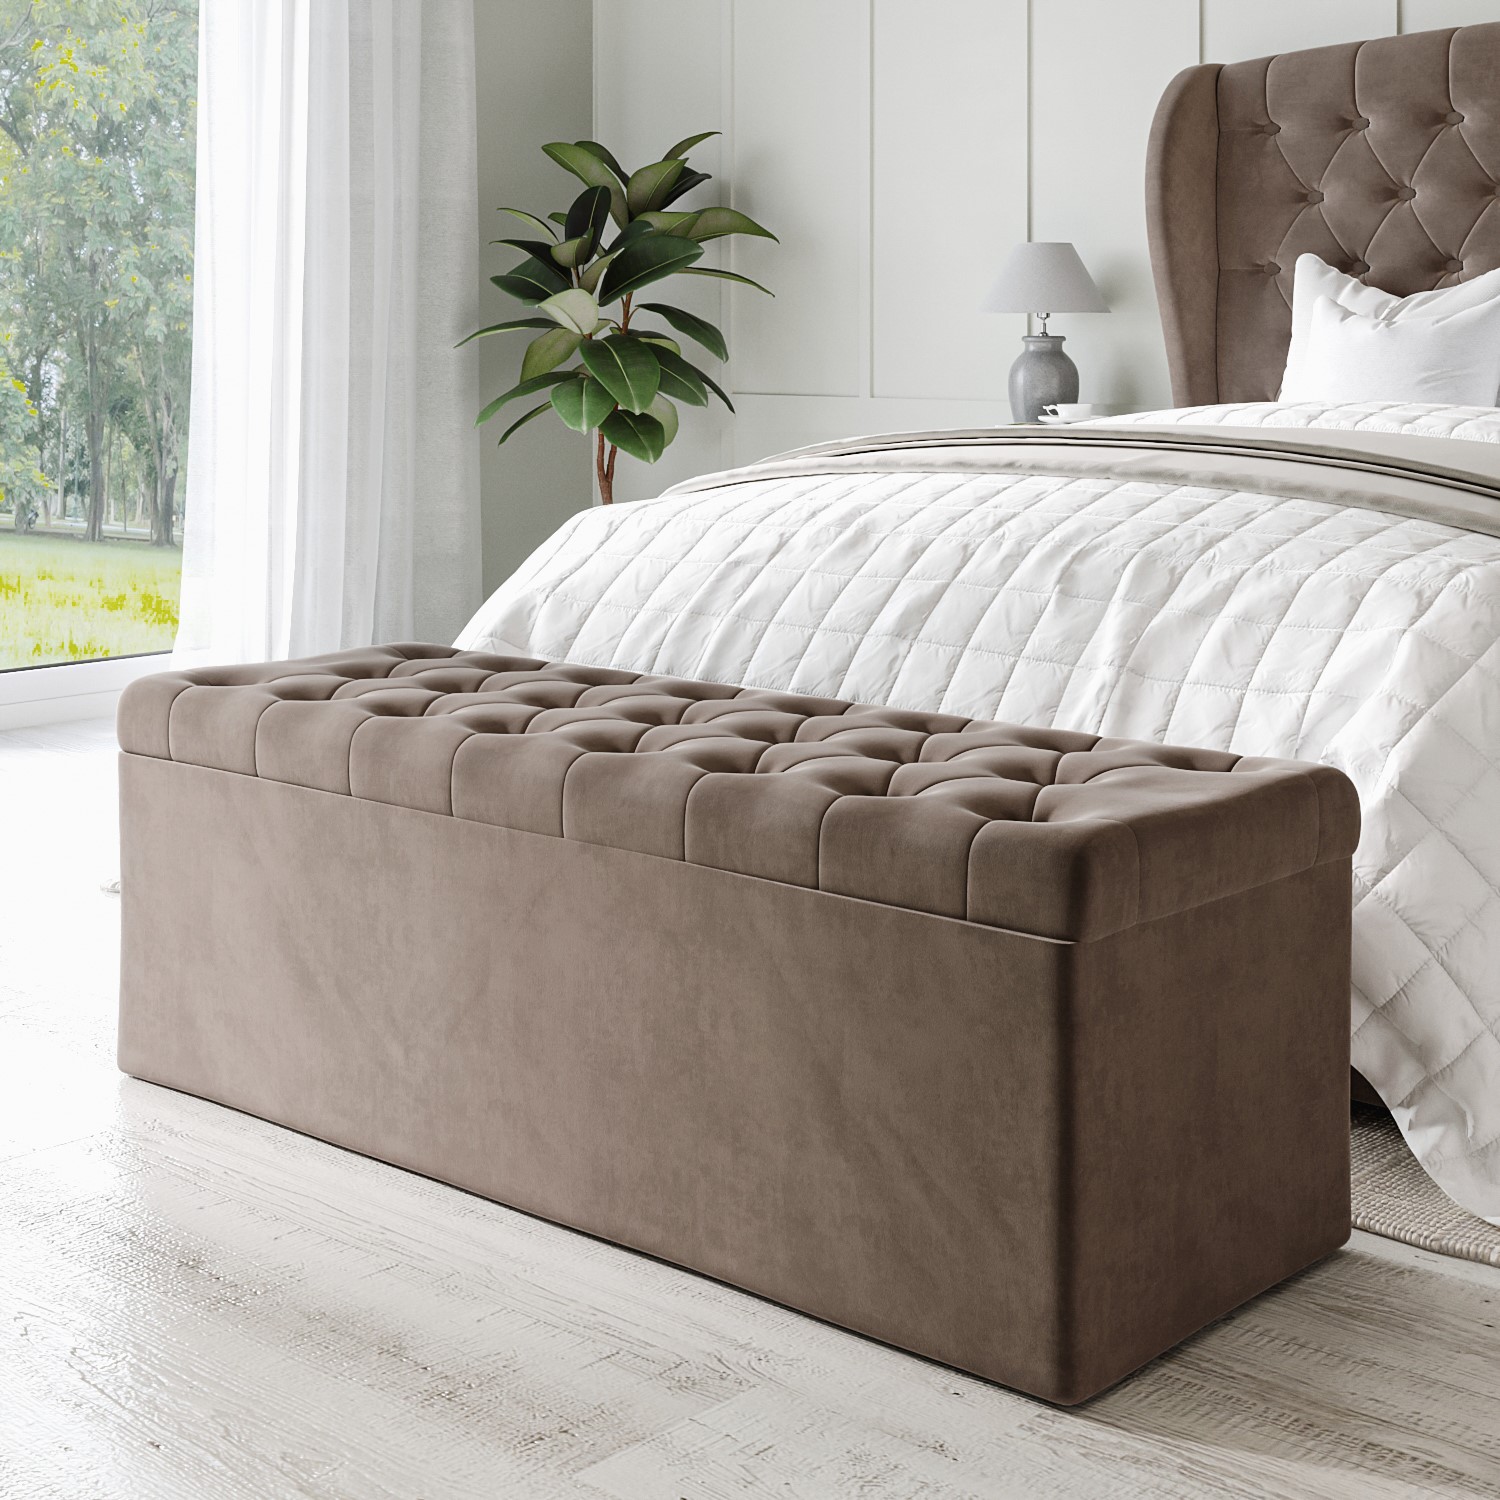 Read more about Mink brown velvet double ottoman bed with blanket box safina